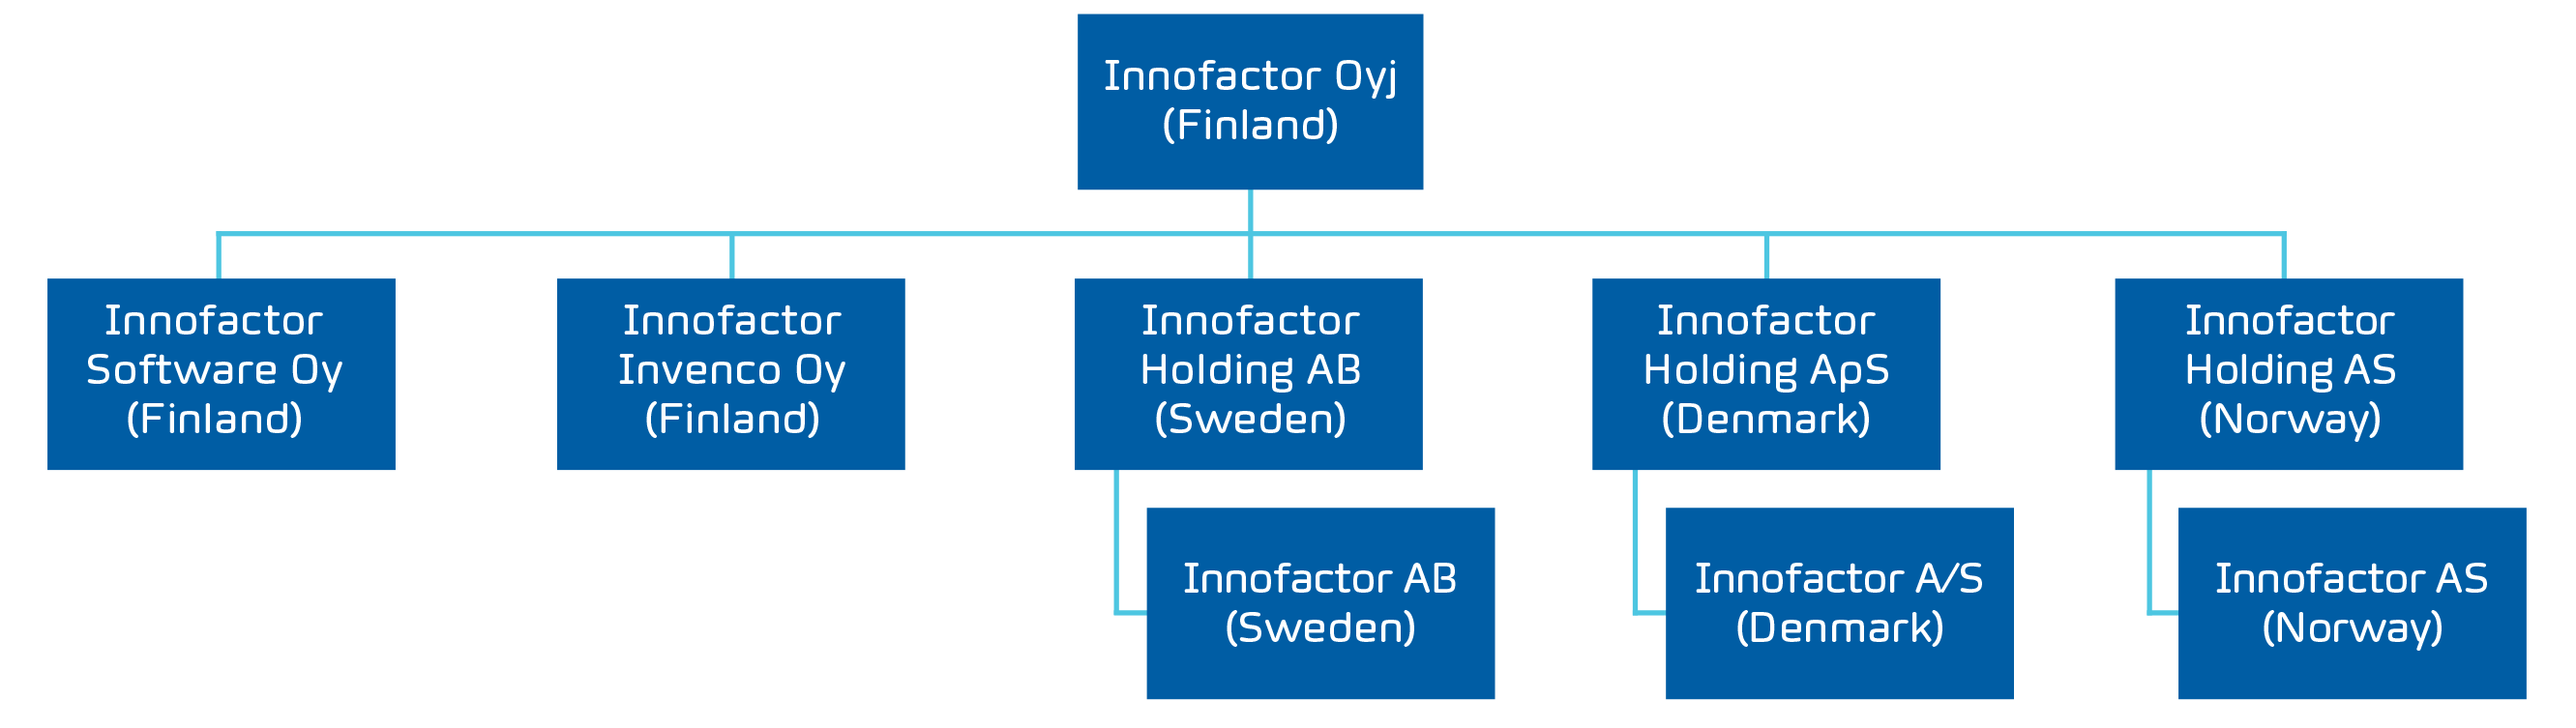 Innofactor's Group Structure